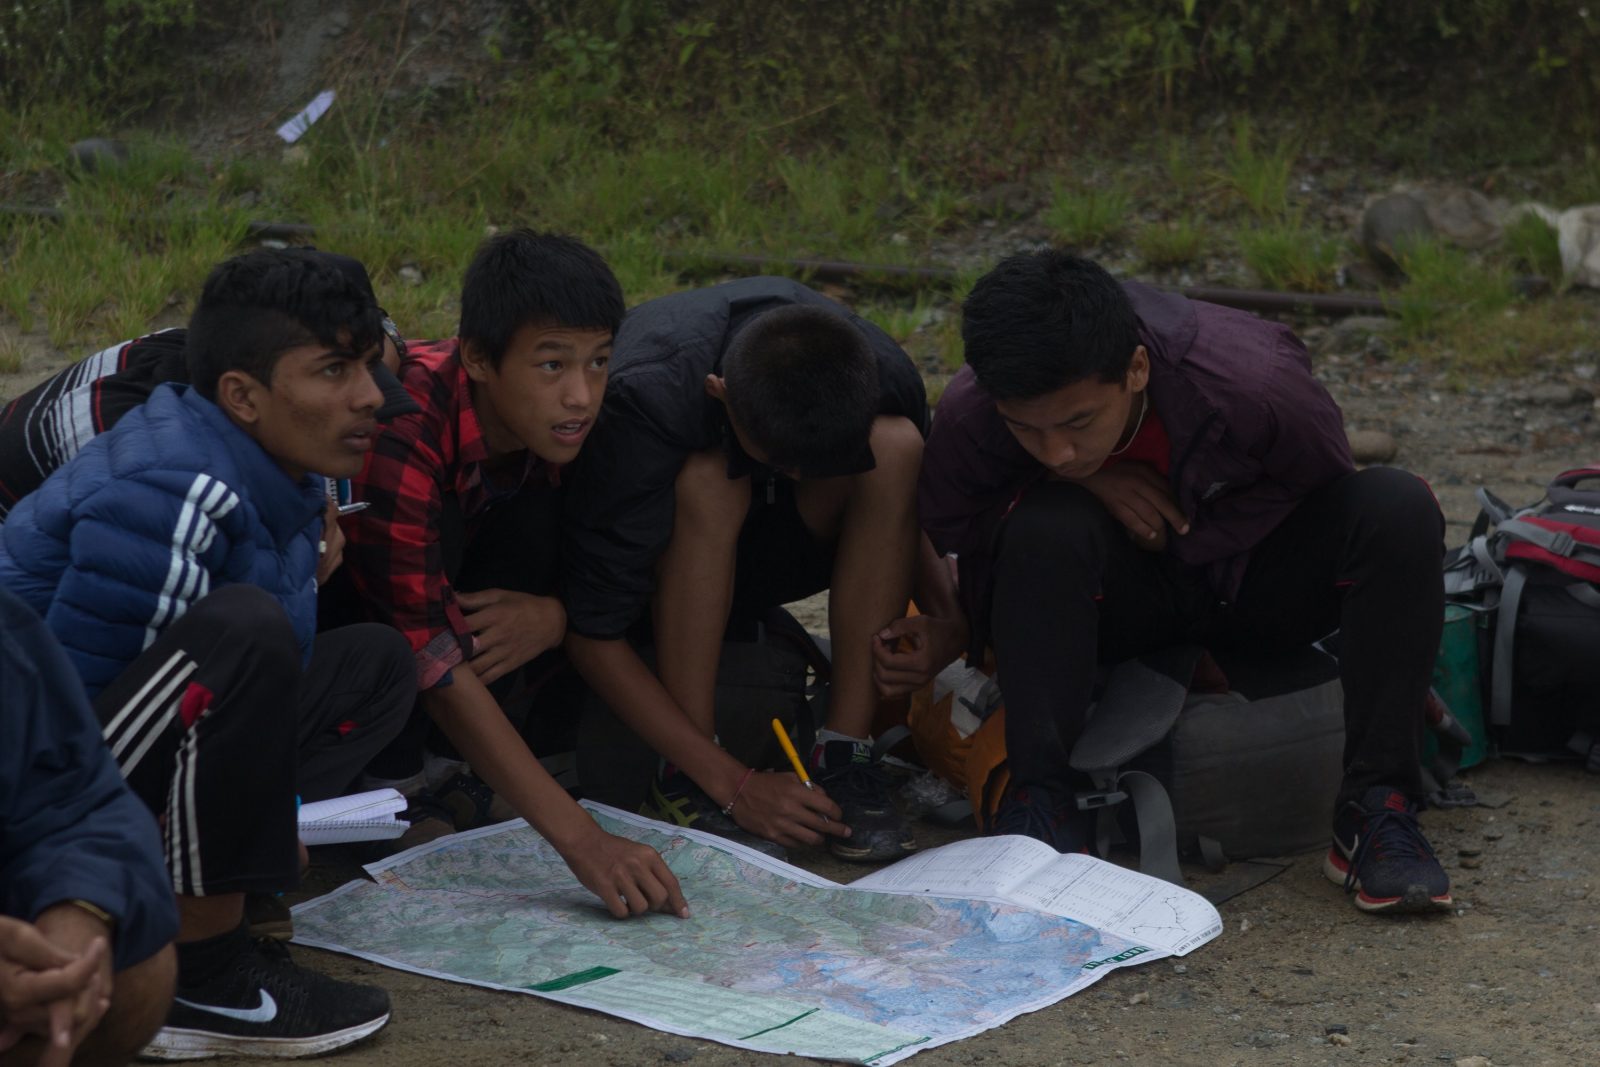 A group of Nepalese boys pore over a map in the mountains.